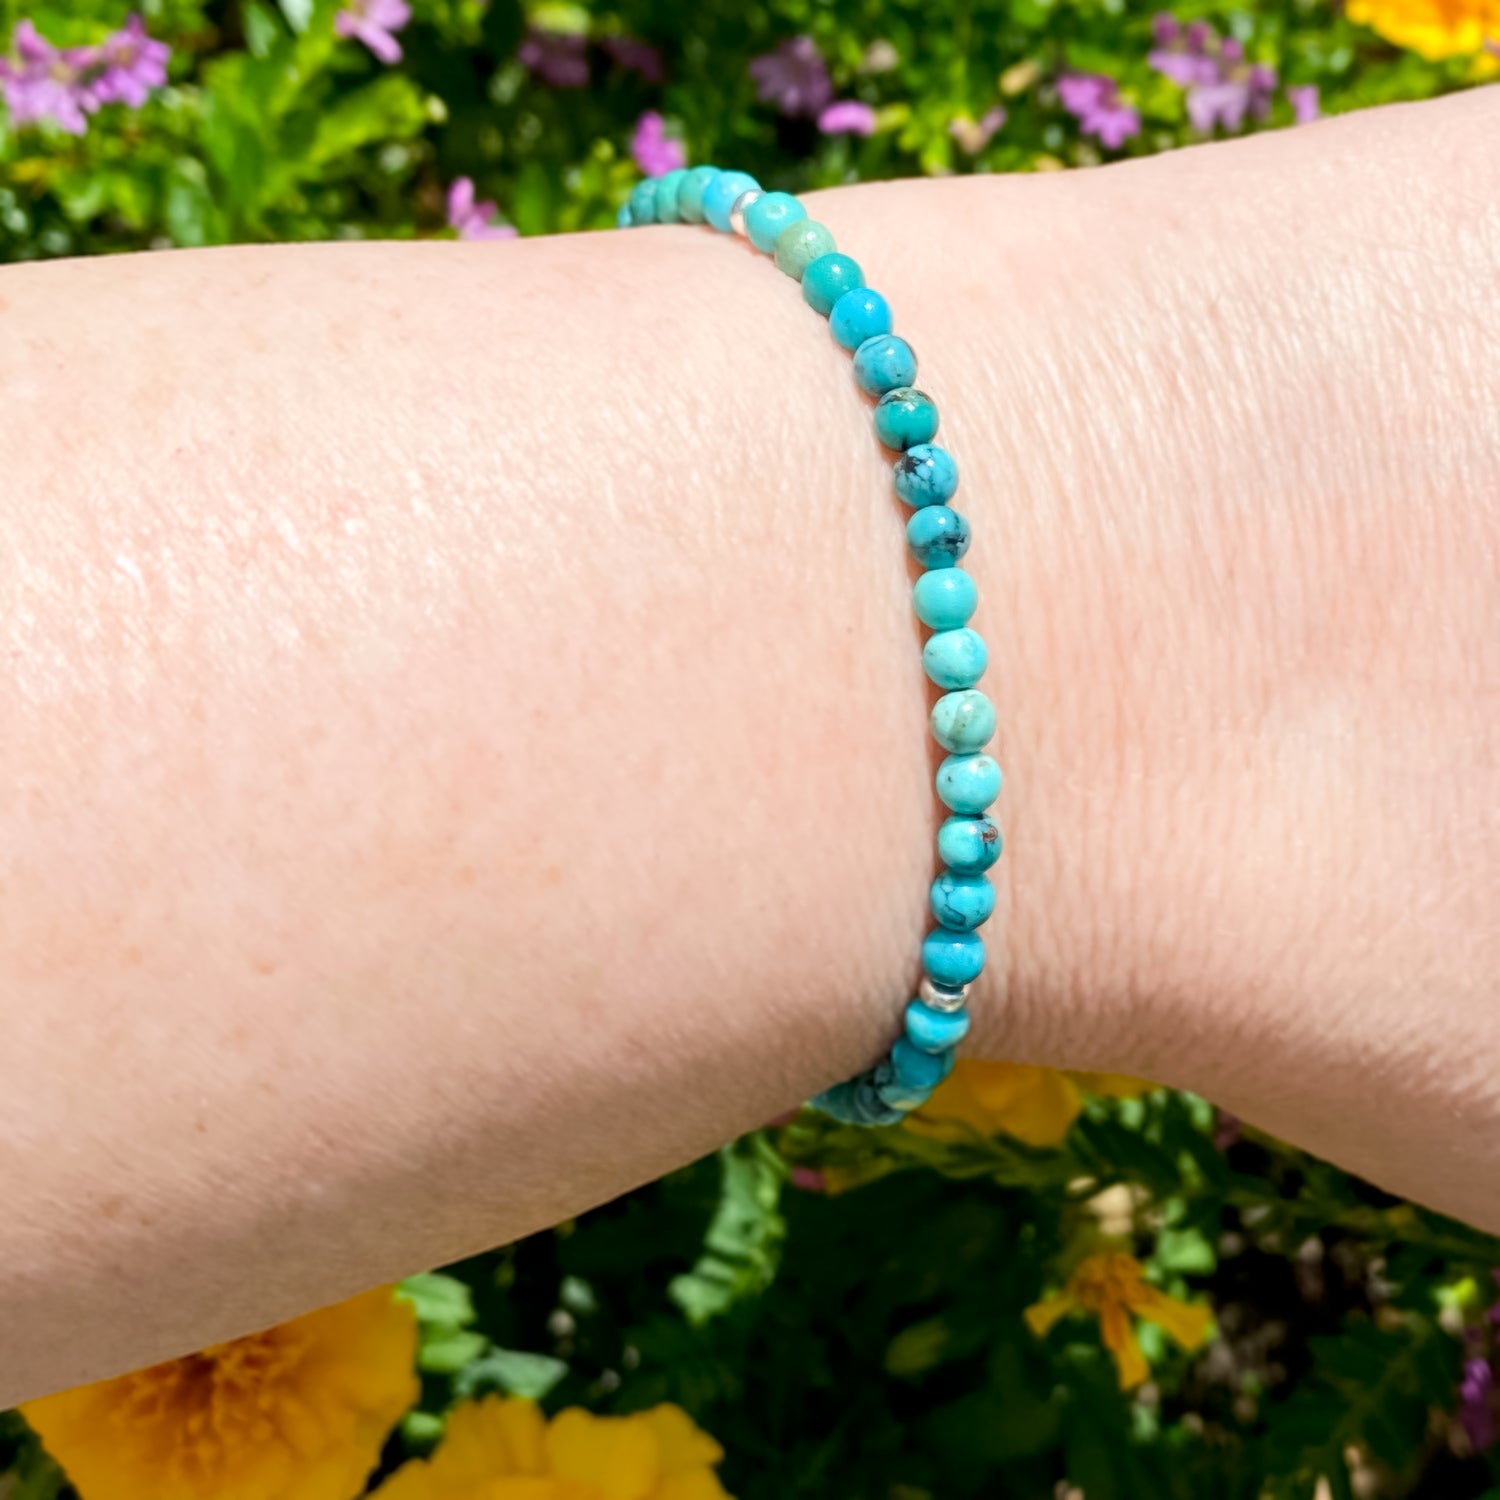 Chunky Genuine Natural Turquoise Bracelet 802b – The Jewelry Junkie